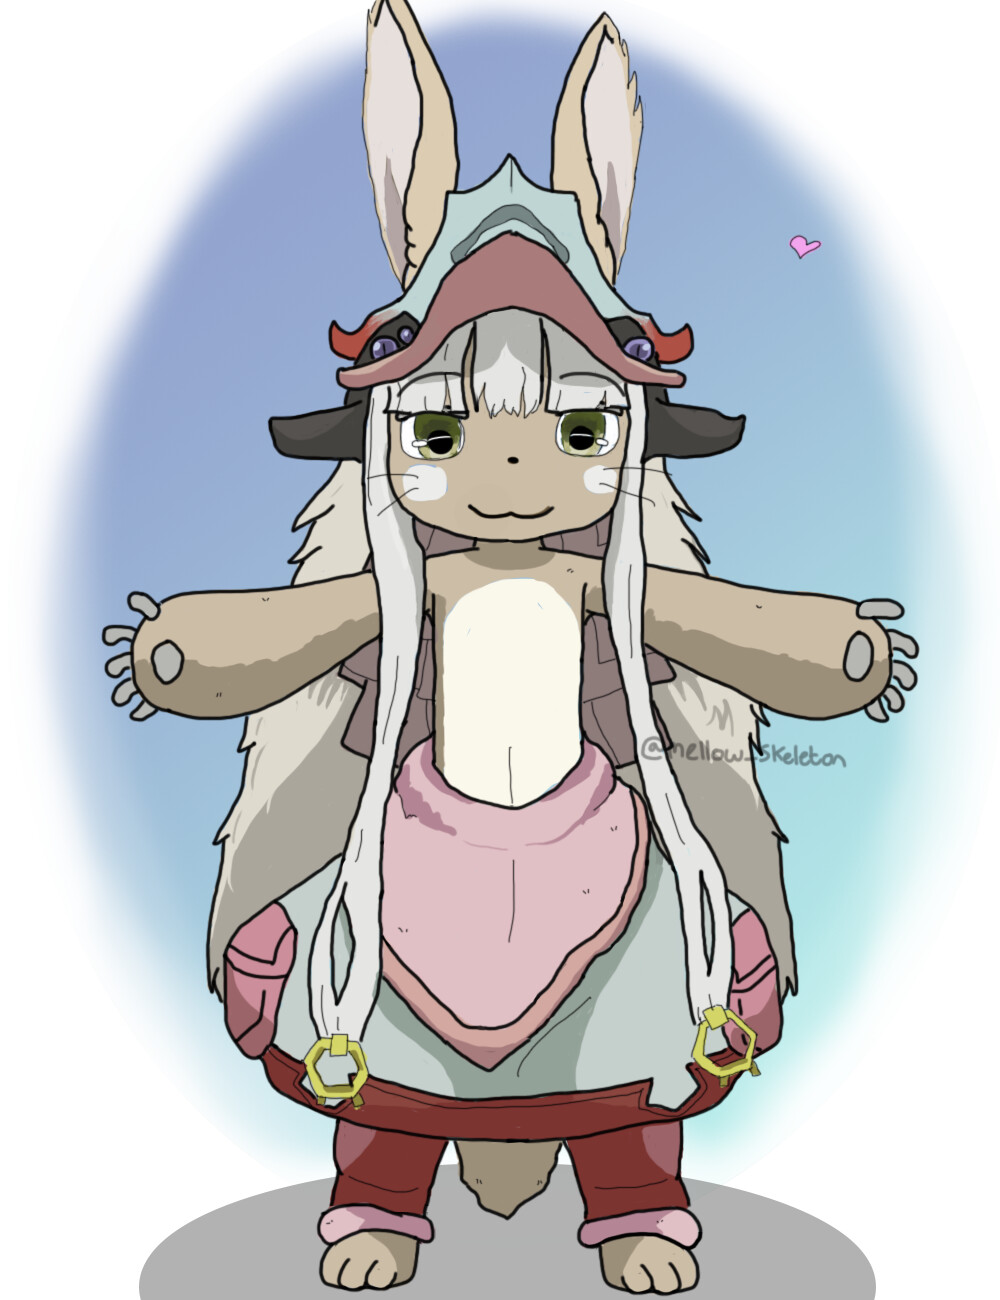 Nanachi (Made in Abyss) - Finished Projects - Blender Artists